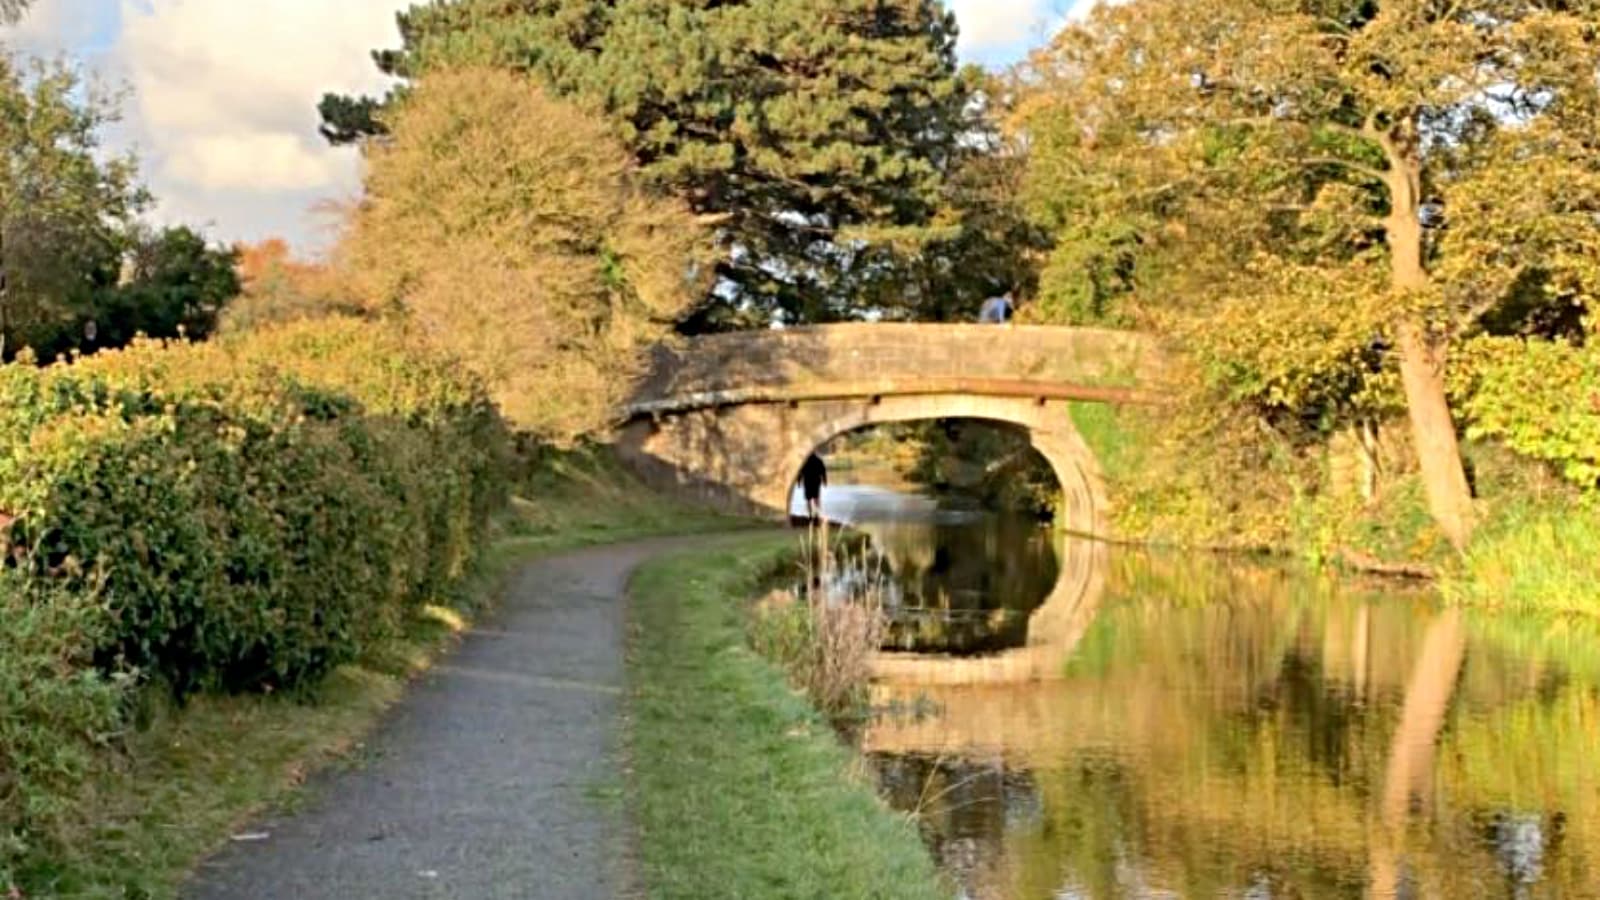 A view along the canal towpath with a bridge and trees